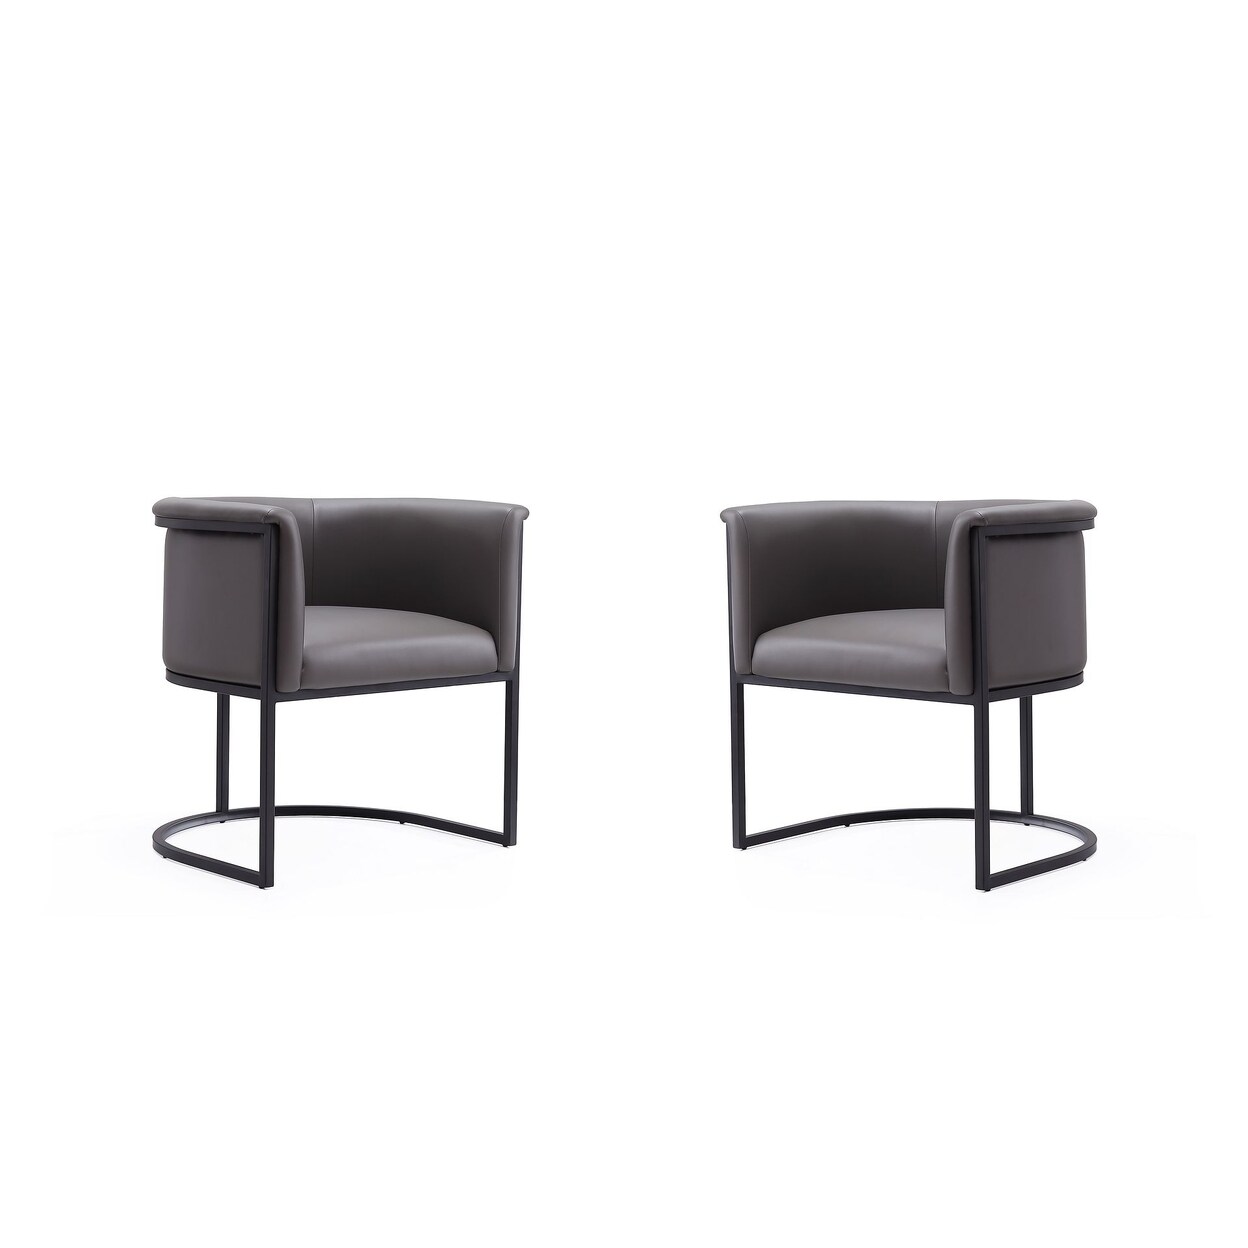 Manhattan Comfort Bali Saddle and Black Faux Leather Dining Chair (Set of 2)